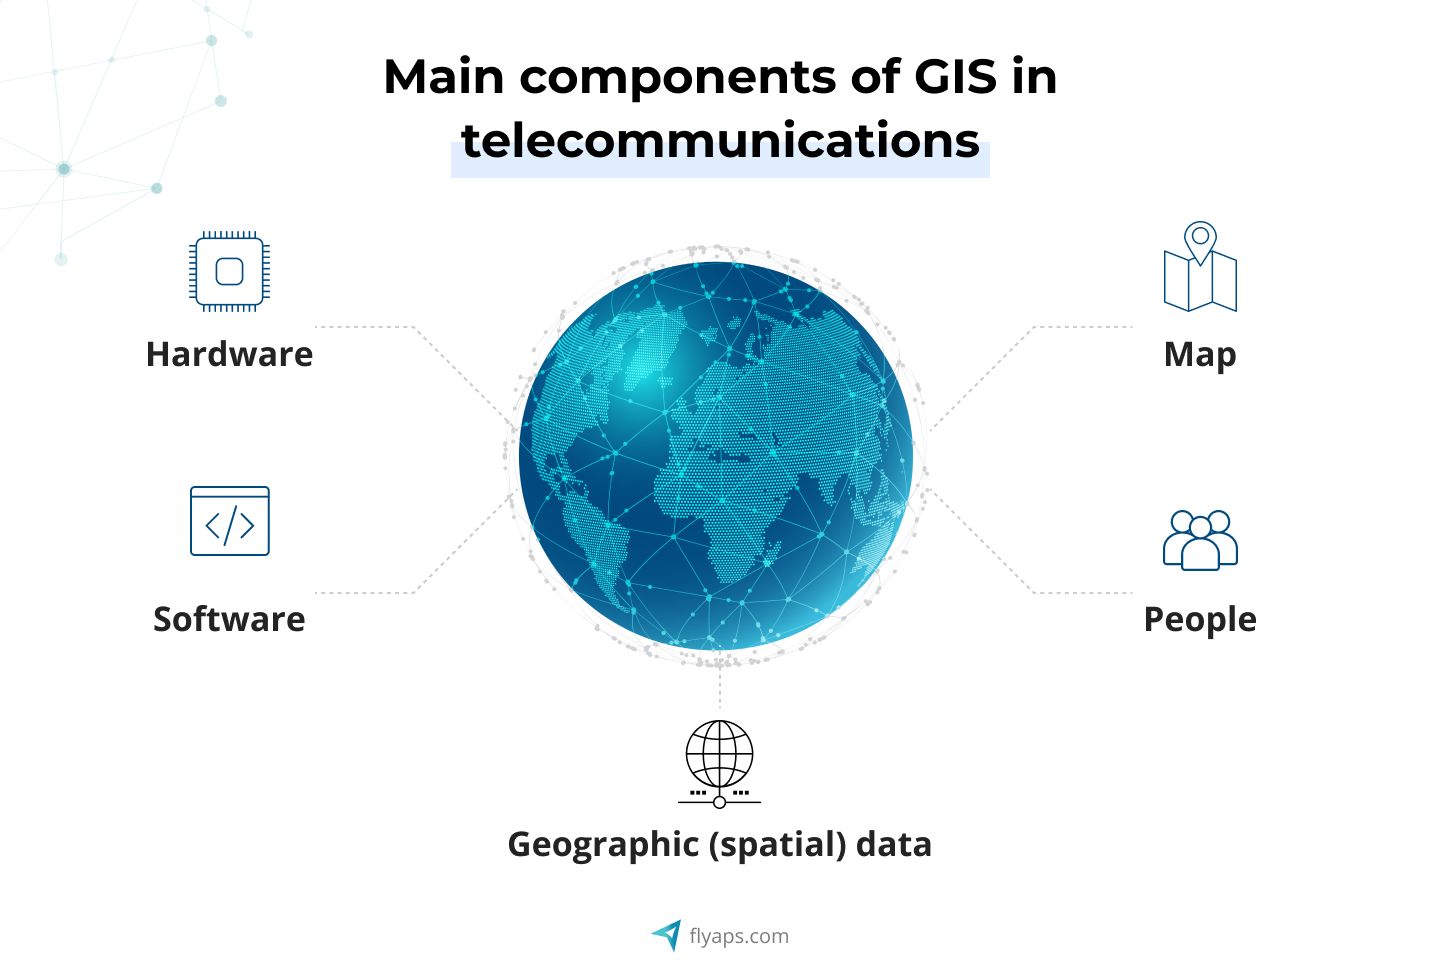 Main components of GIS in telecommunications